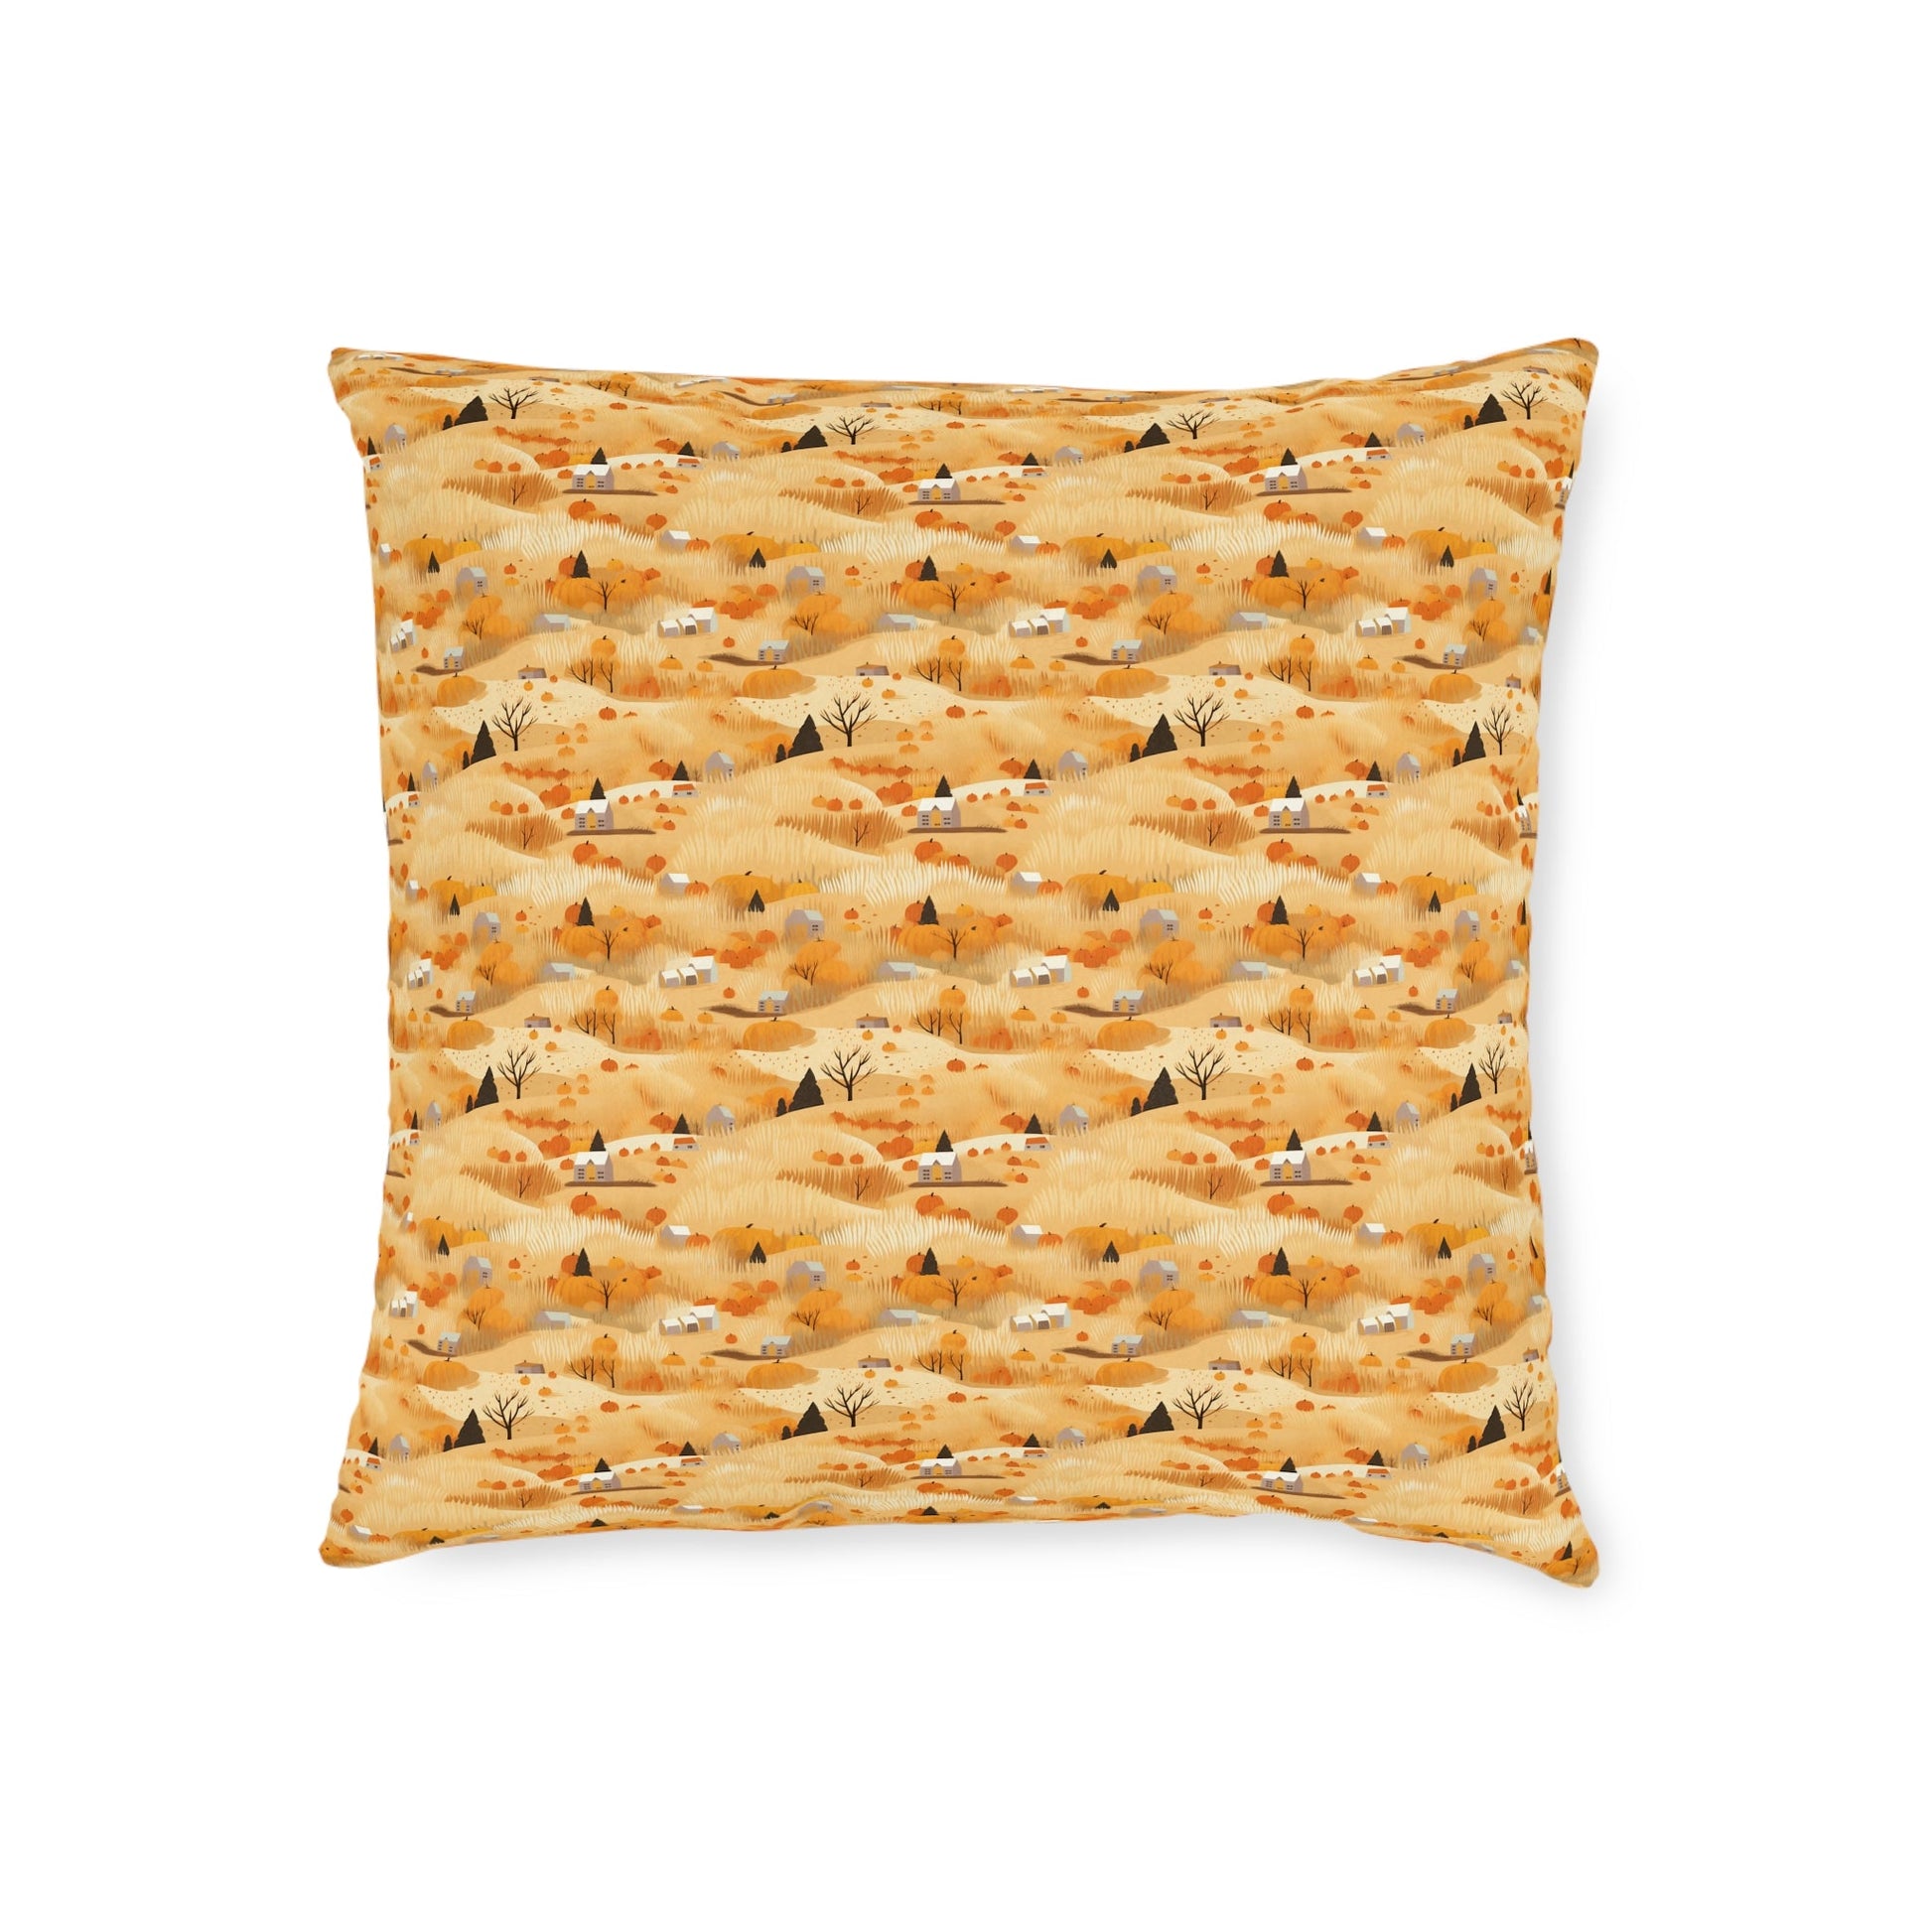 Harvest Homestead: Whimsical Autumn Villages - Square Pillow - Pattern Symphony